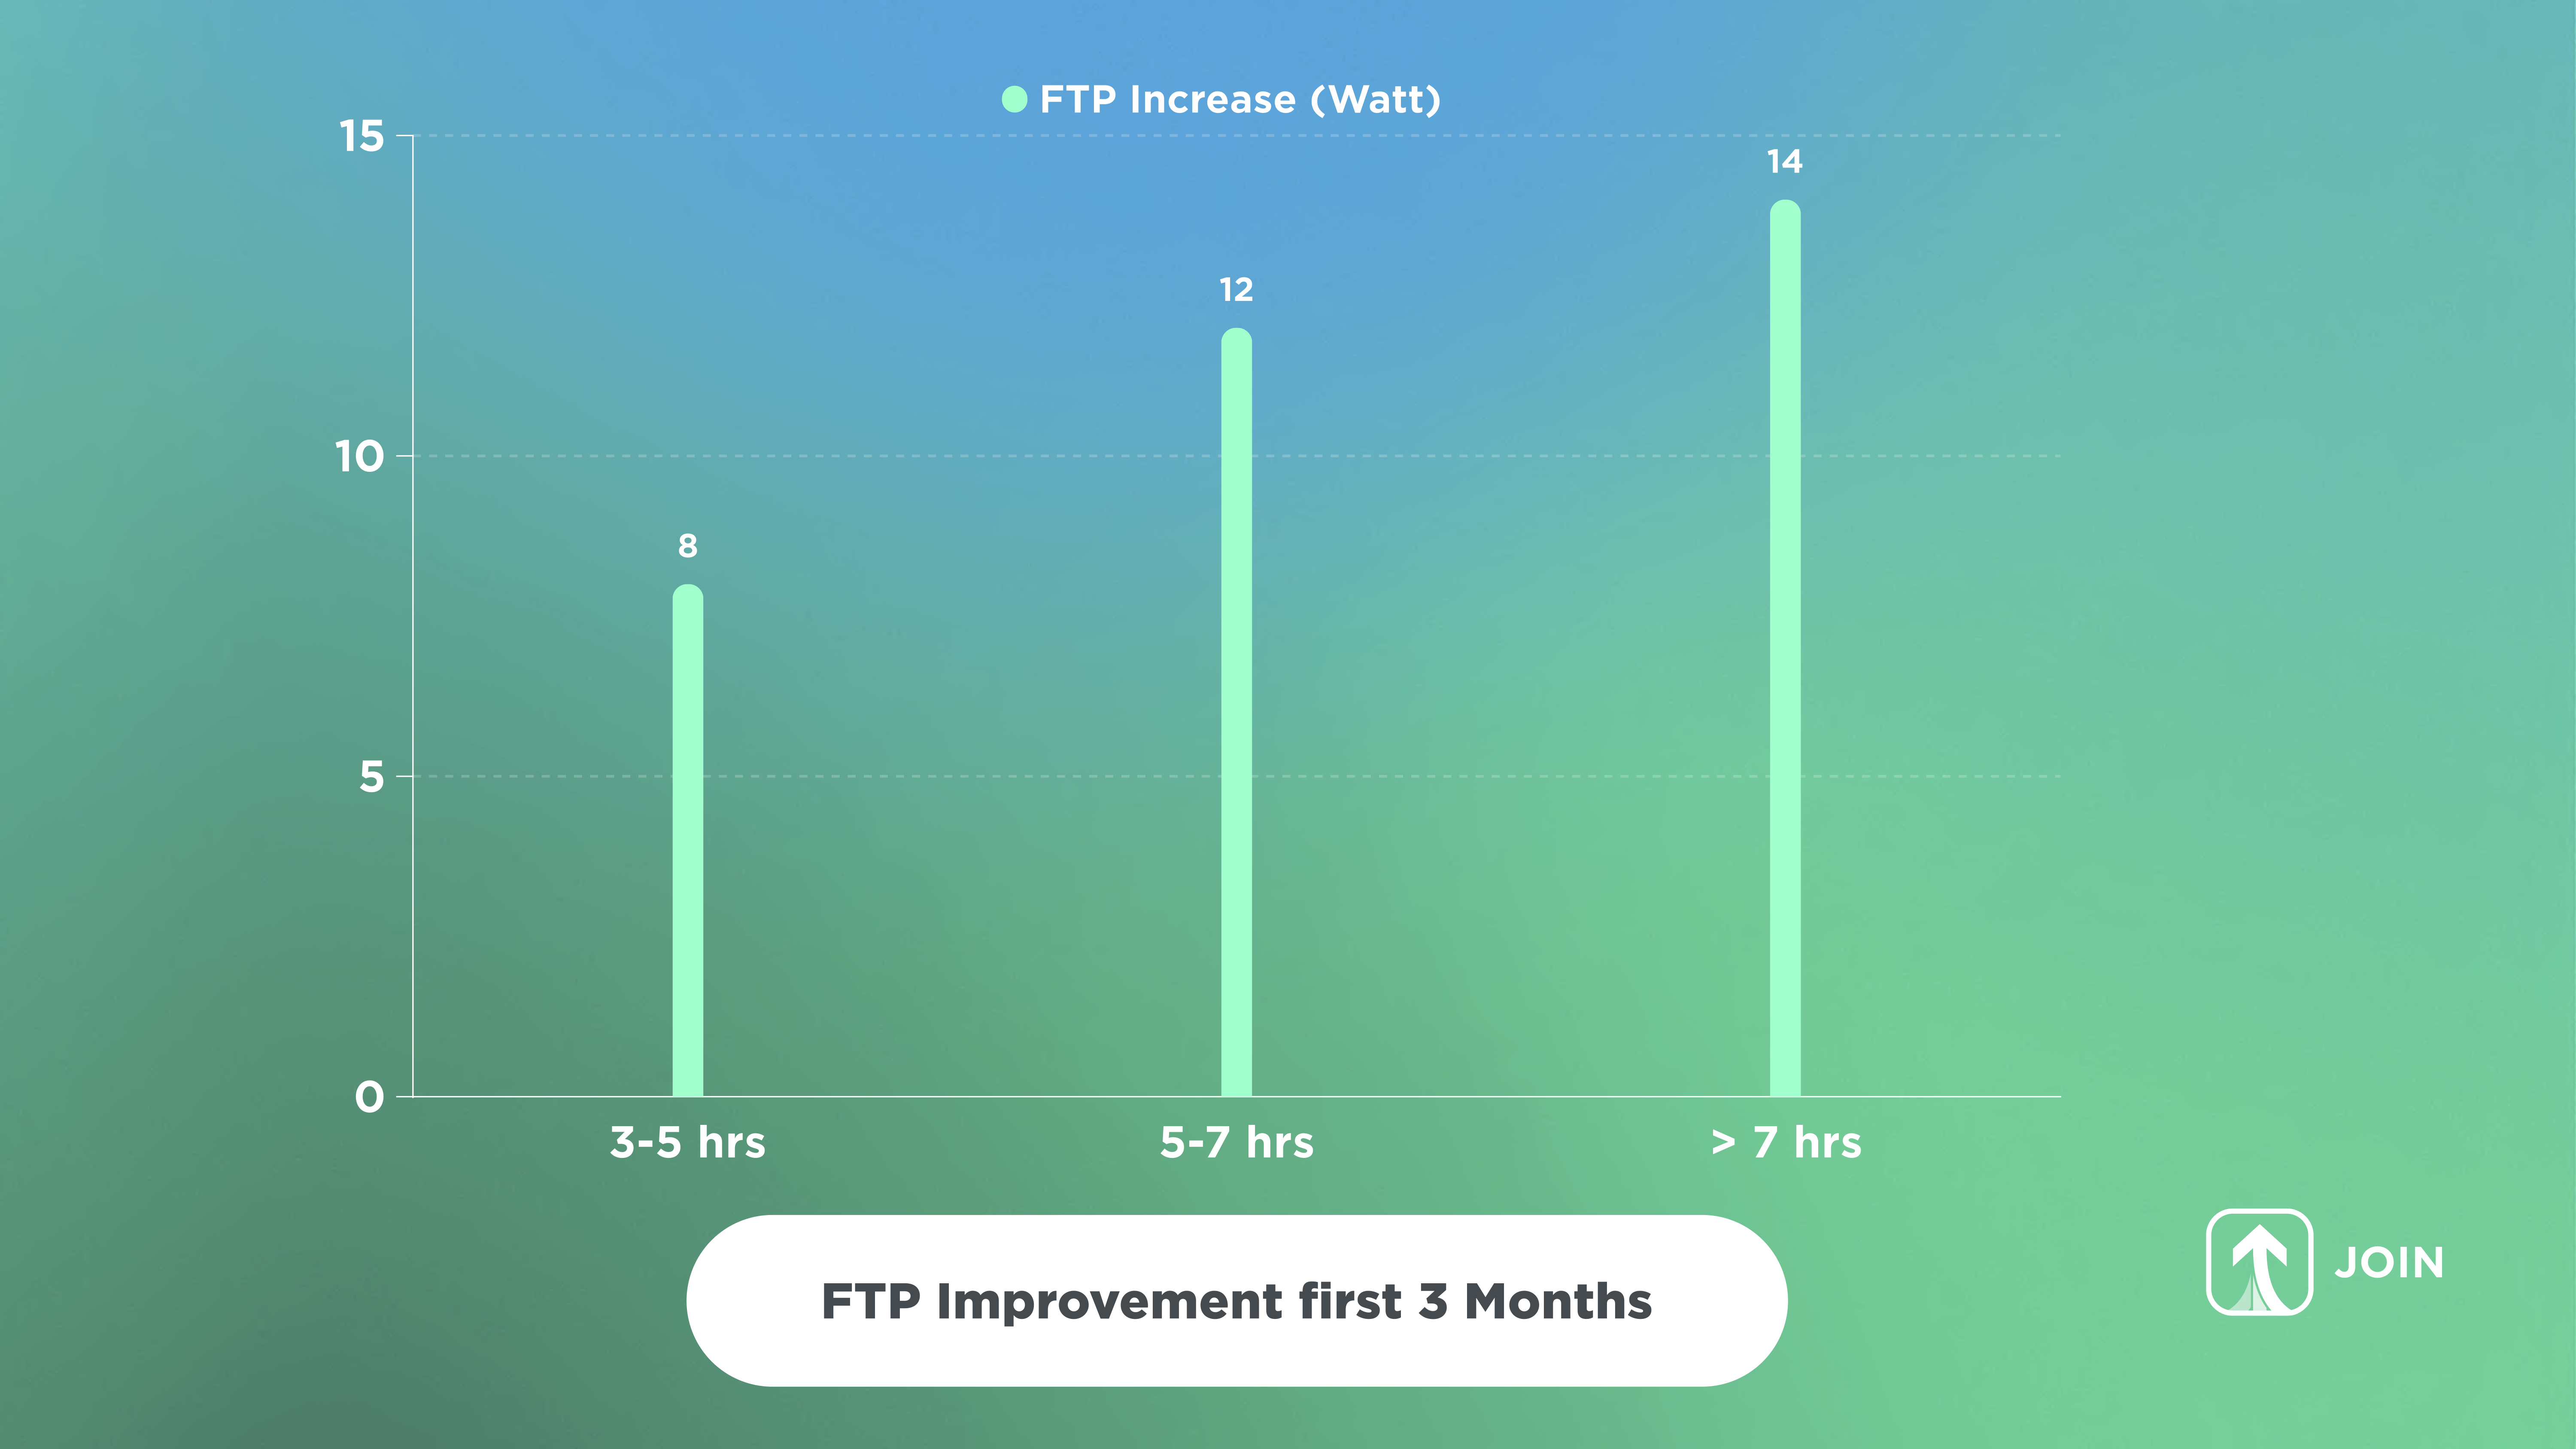 FTP improvement first 3 months with JOIN